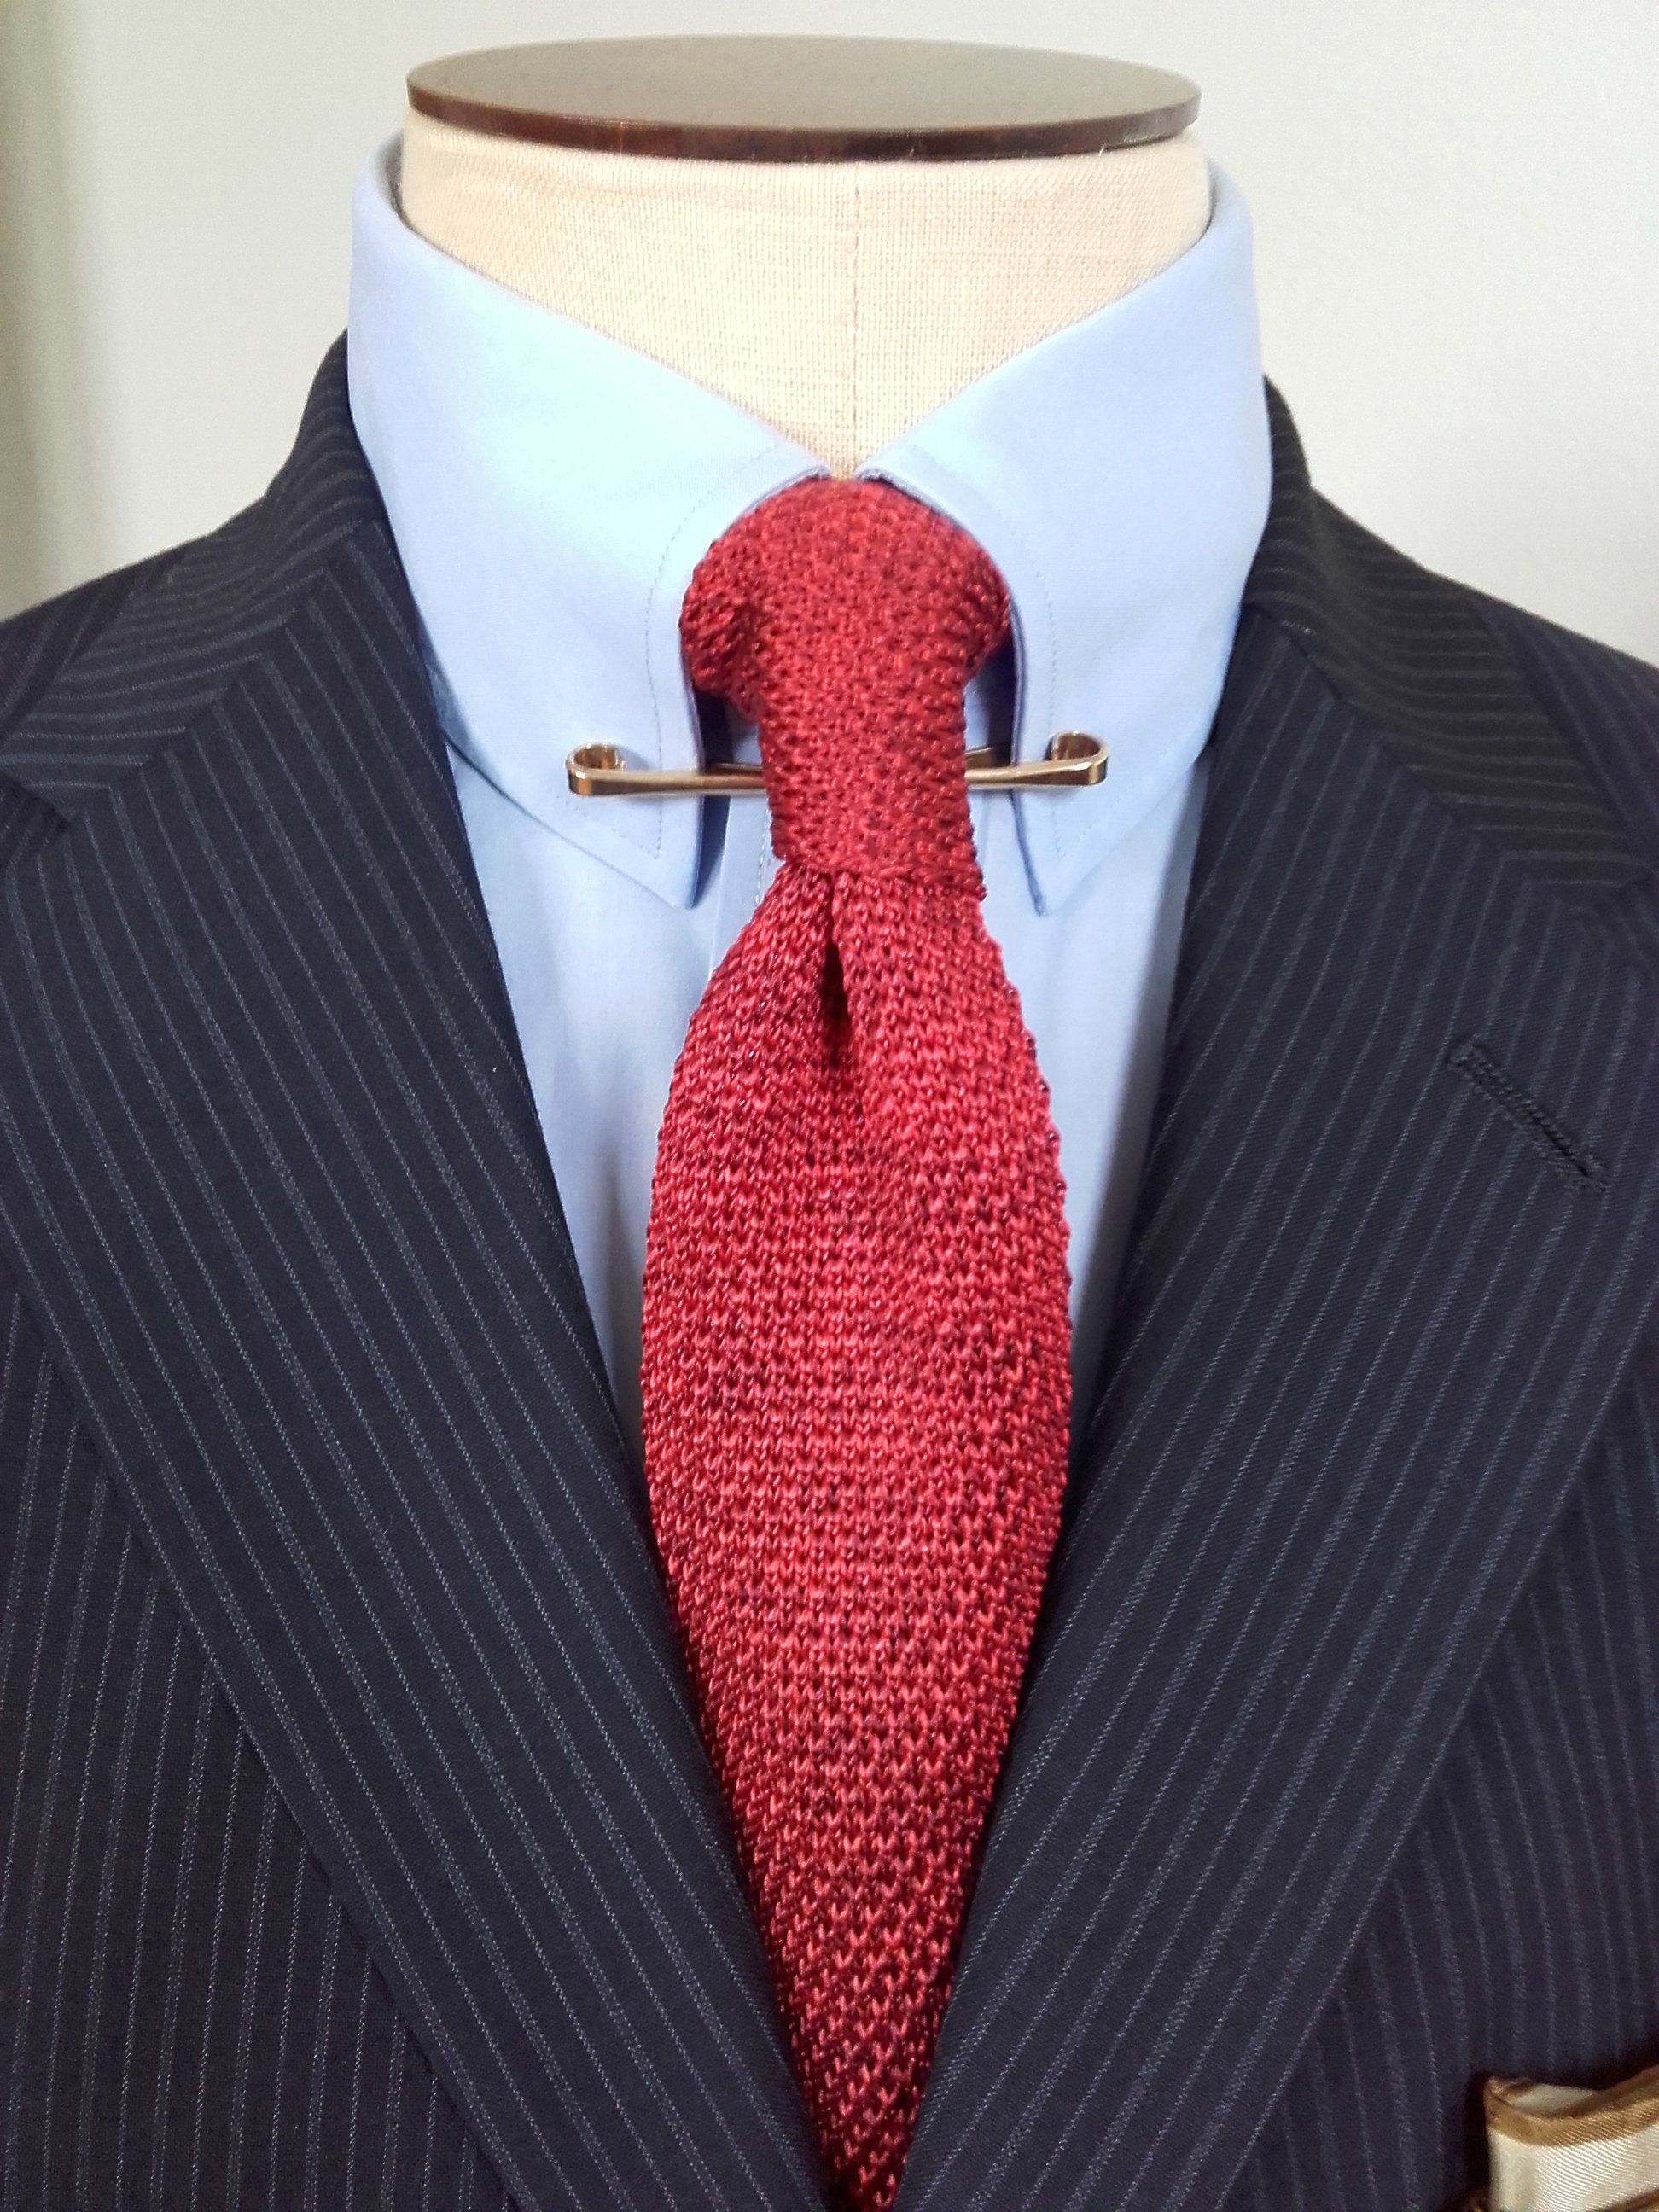 How to Wear a Collar Bar, How to Put On a Collar Bar